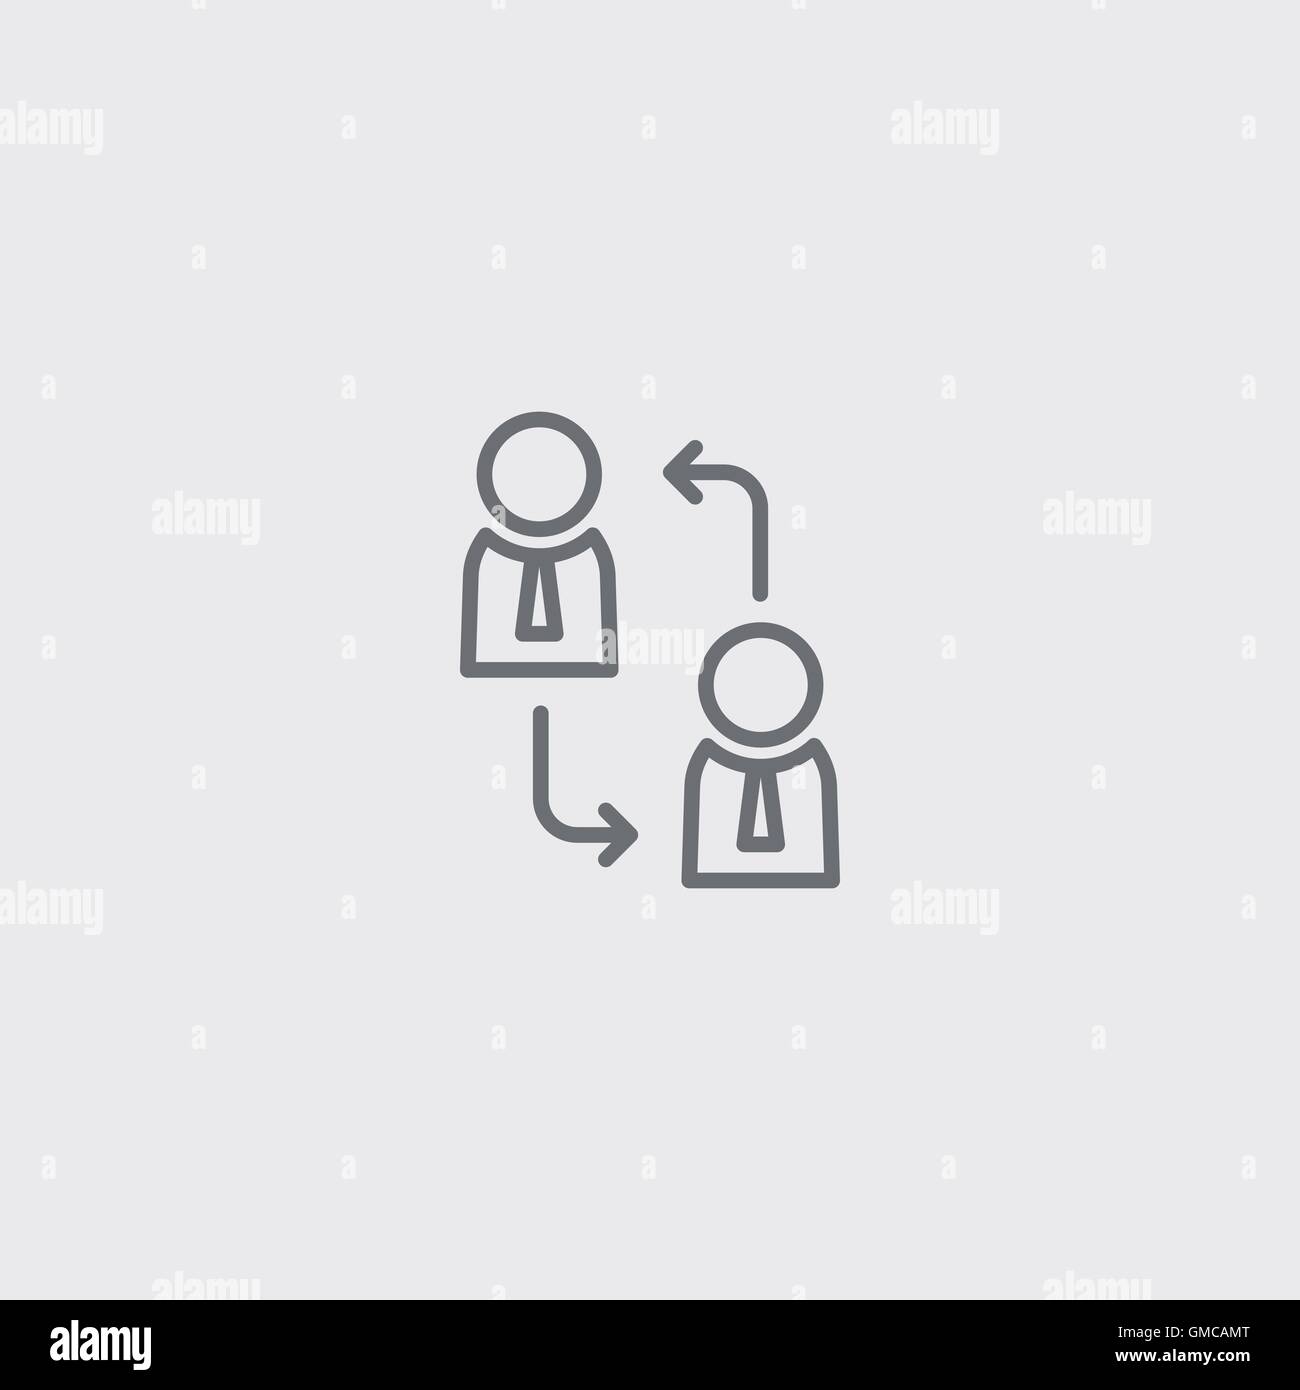 conversation icon of grey and thin outline Stock Vector